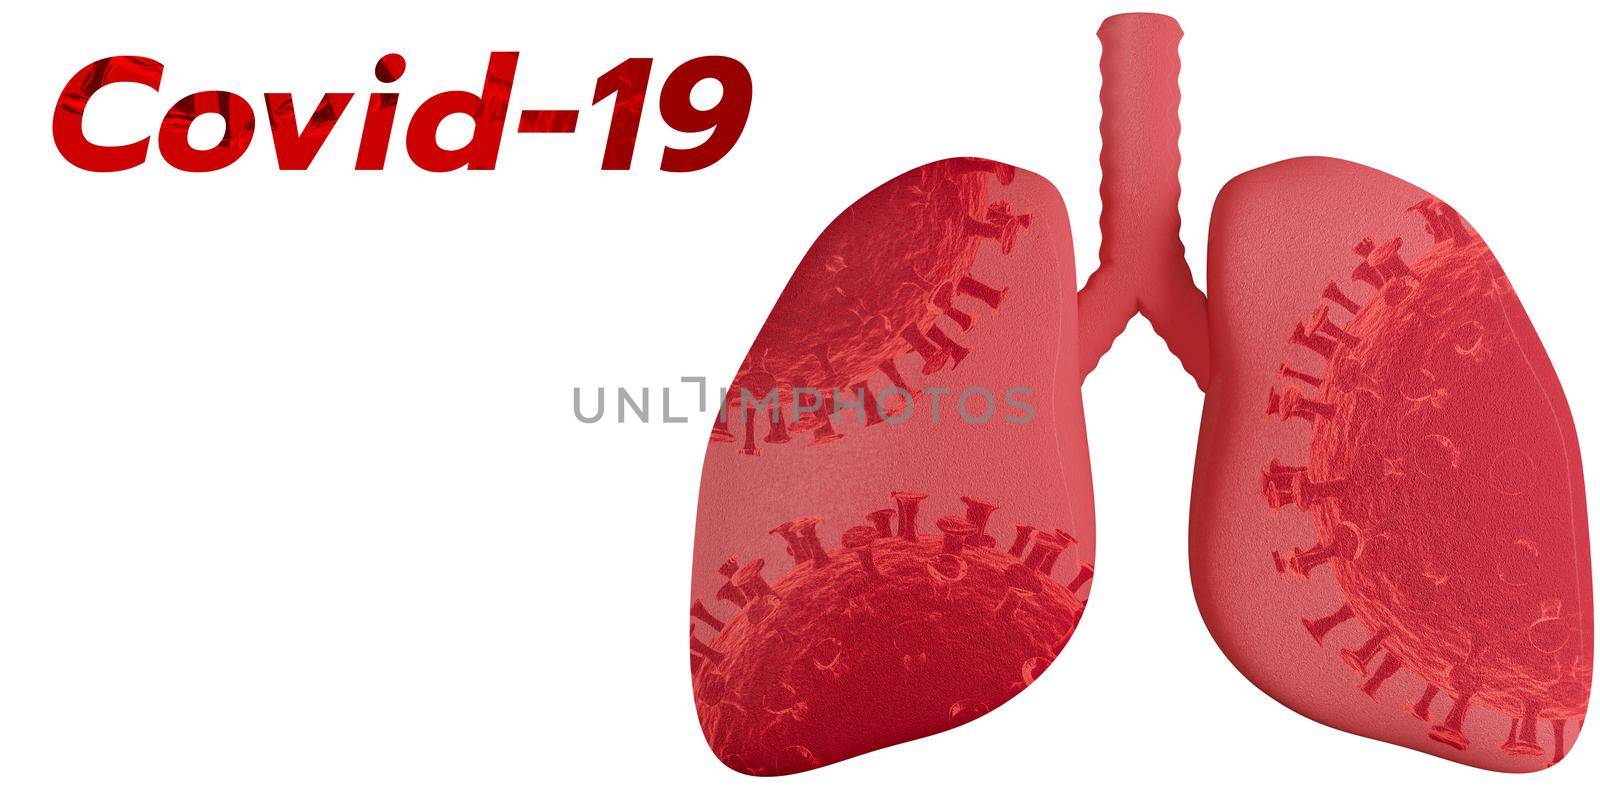 Red text COVID-19 with virus in lung graphic on white background, name for Coronavirus disease. 3d